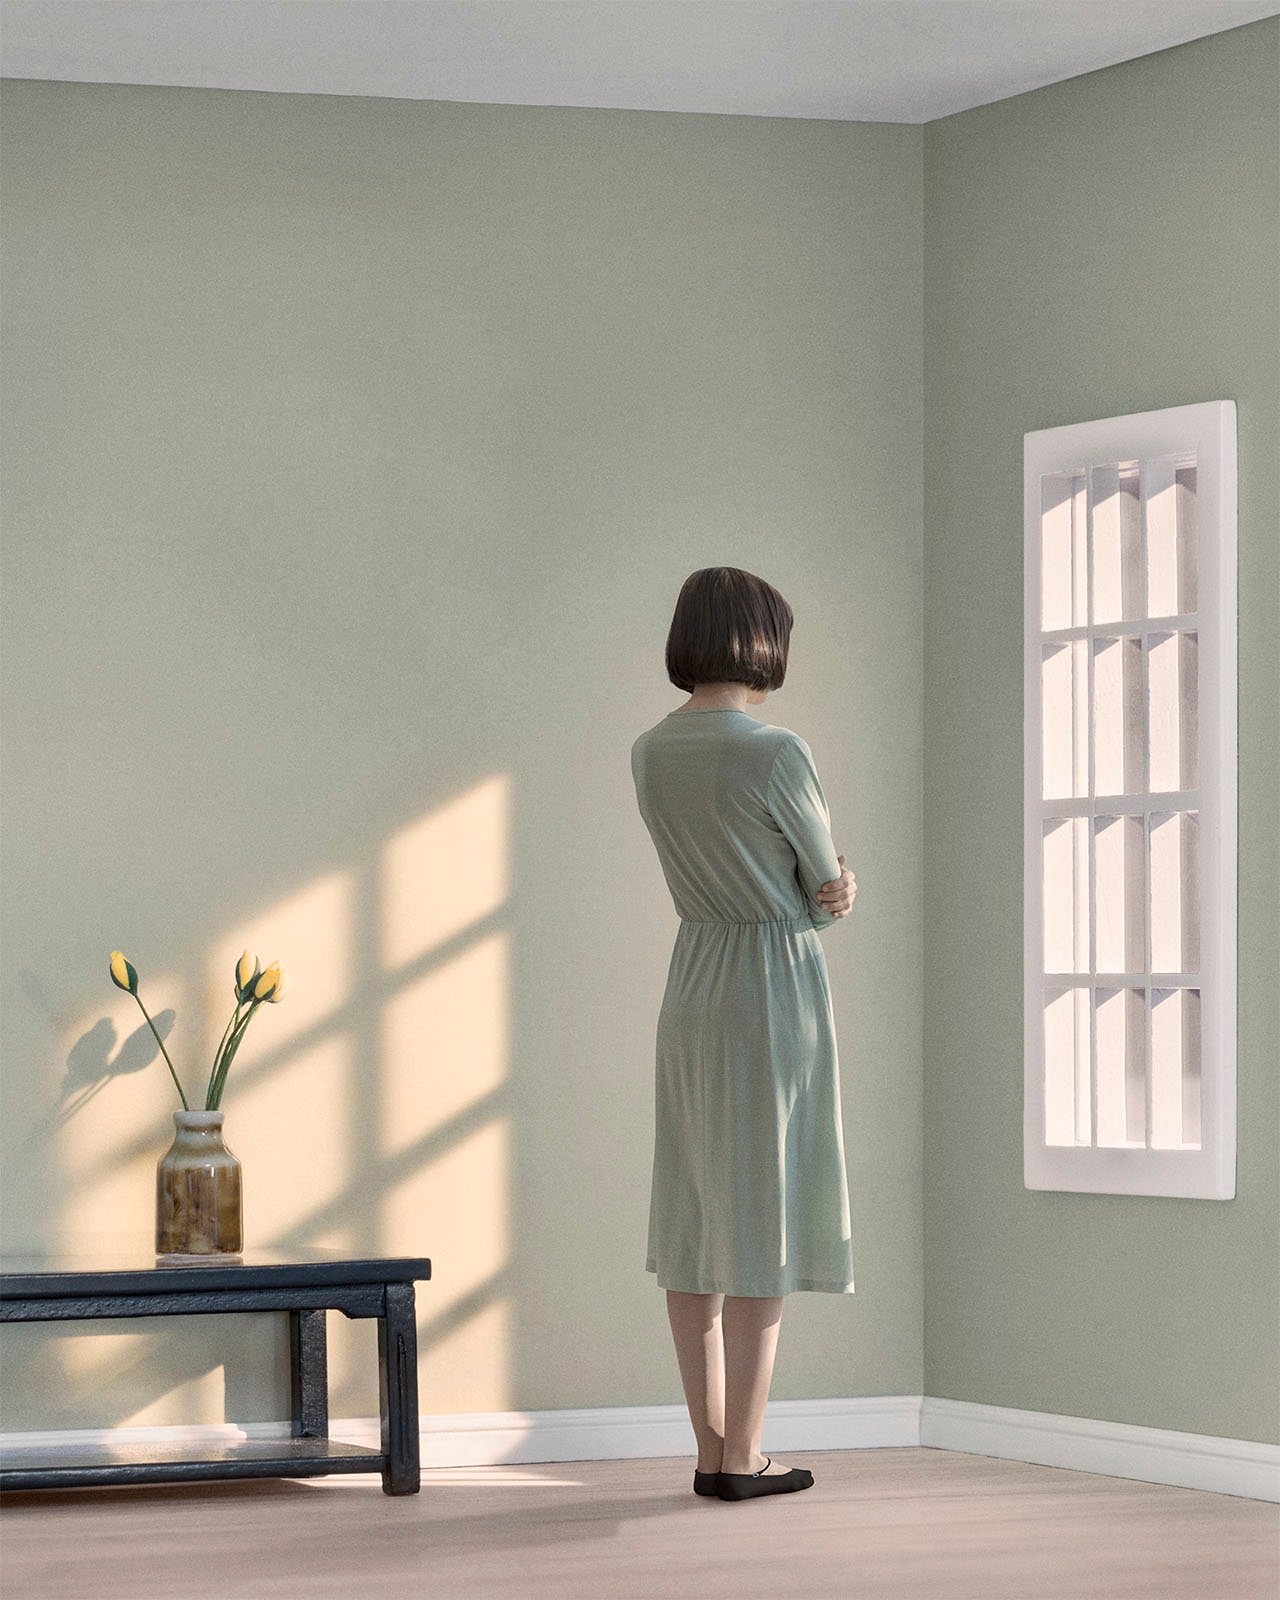 A woman in a teal dress stands facing a wall in a minimalistic room, gazing at a window with light casting shadows on the wall. a small table with a vase and flowers is nearby.